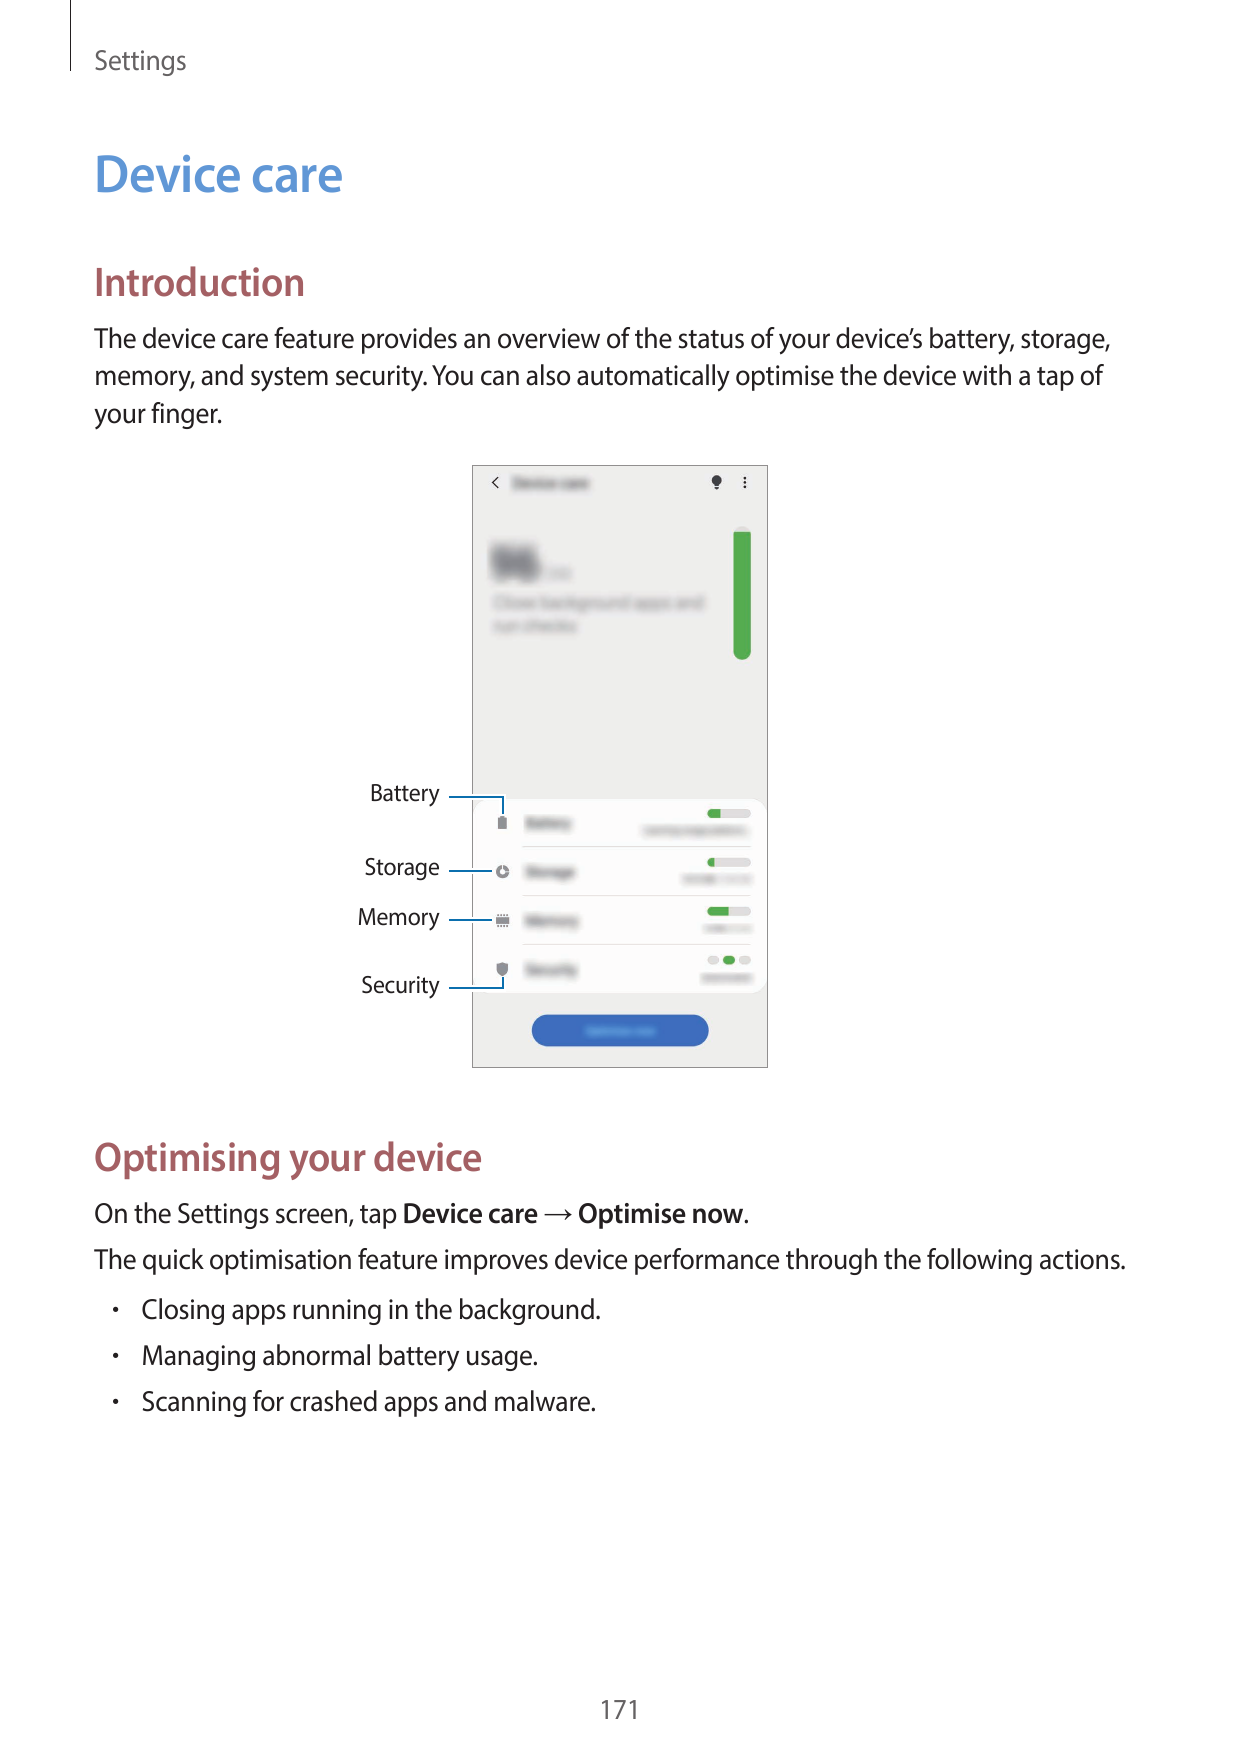 SettingsDevice careIntroductionThe device care feature provides an overview of the status of your device’s battery, storage,memo